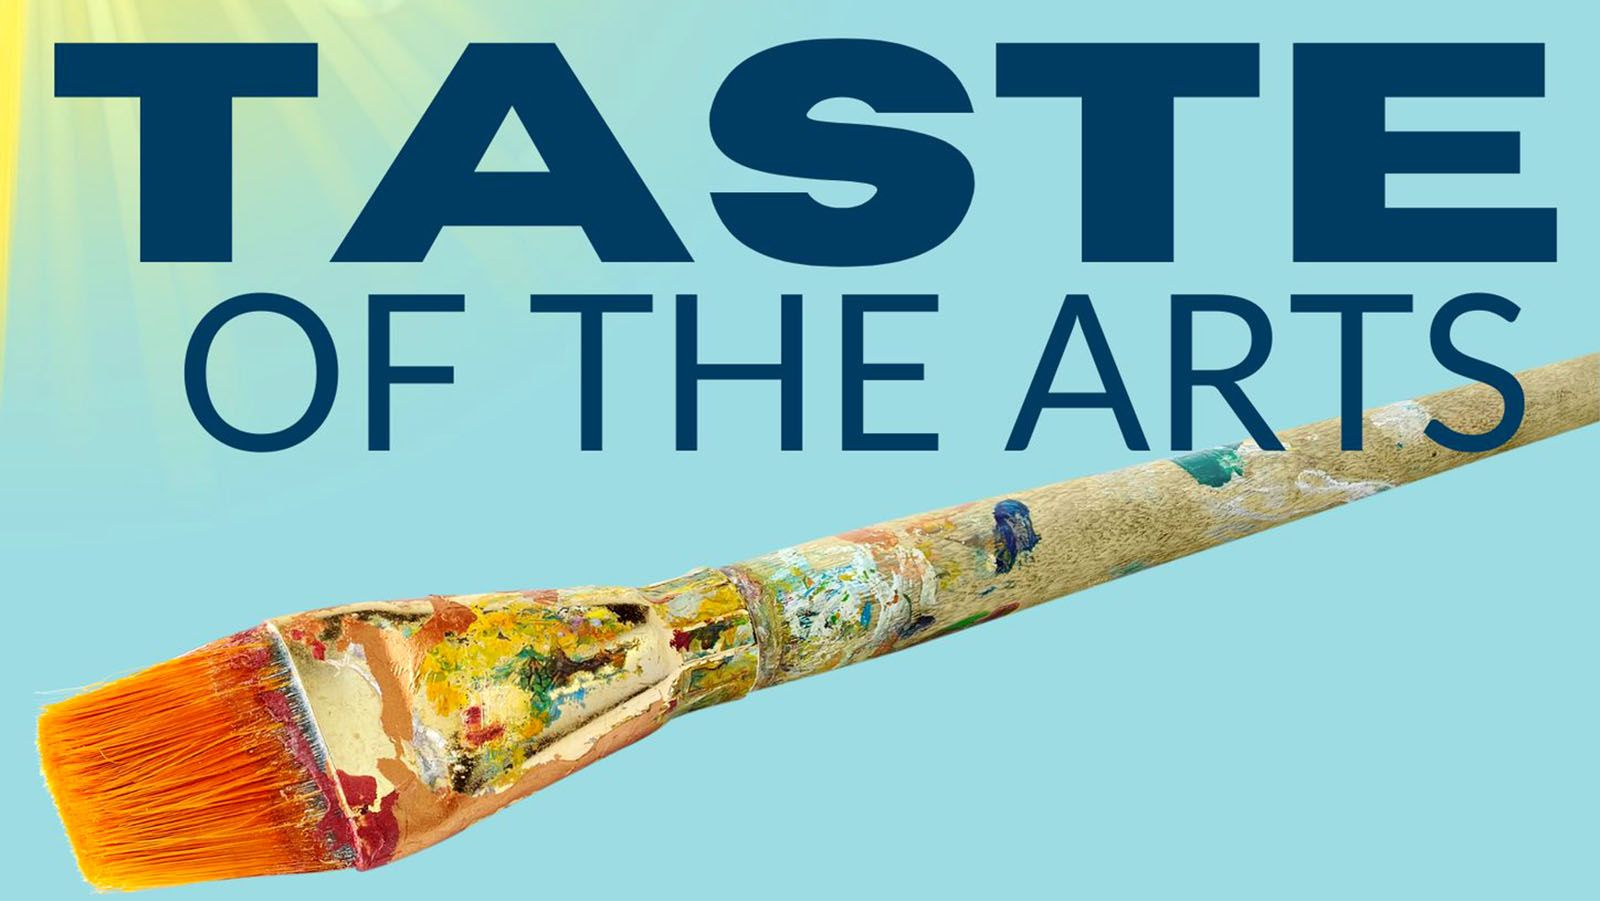 Columbia City will host their Taste of the Arts on Saturday, June 8.